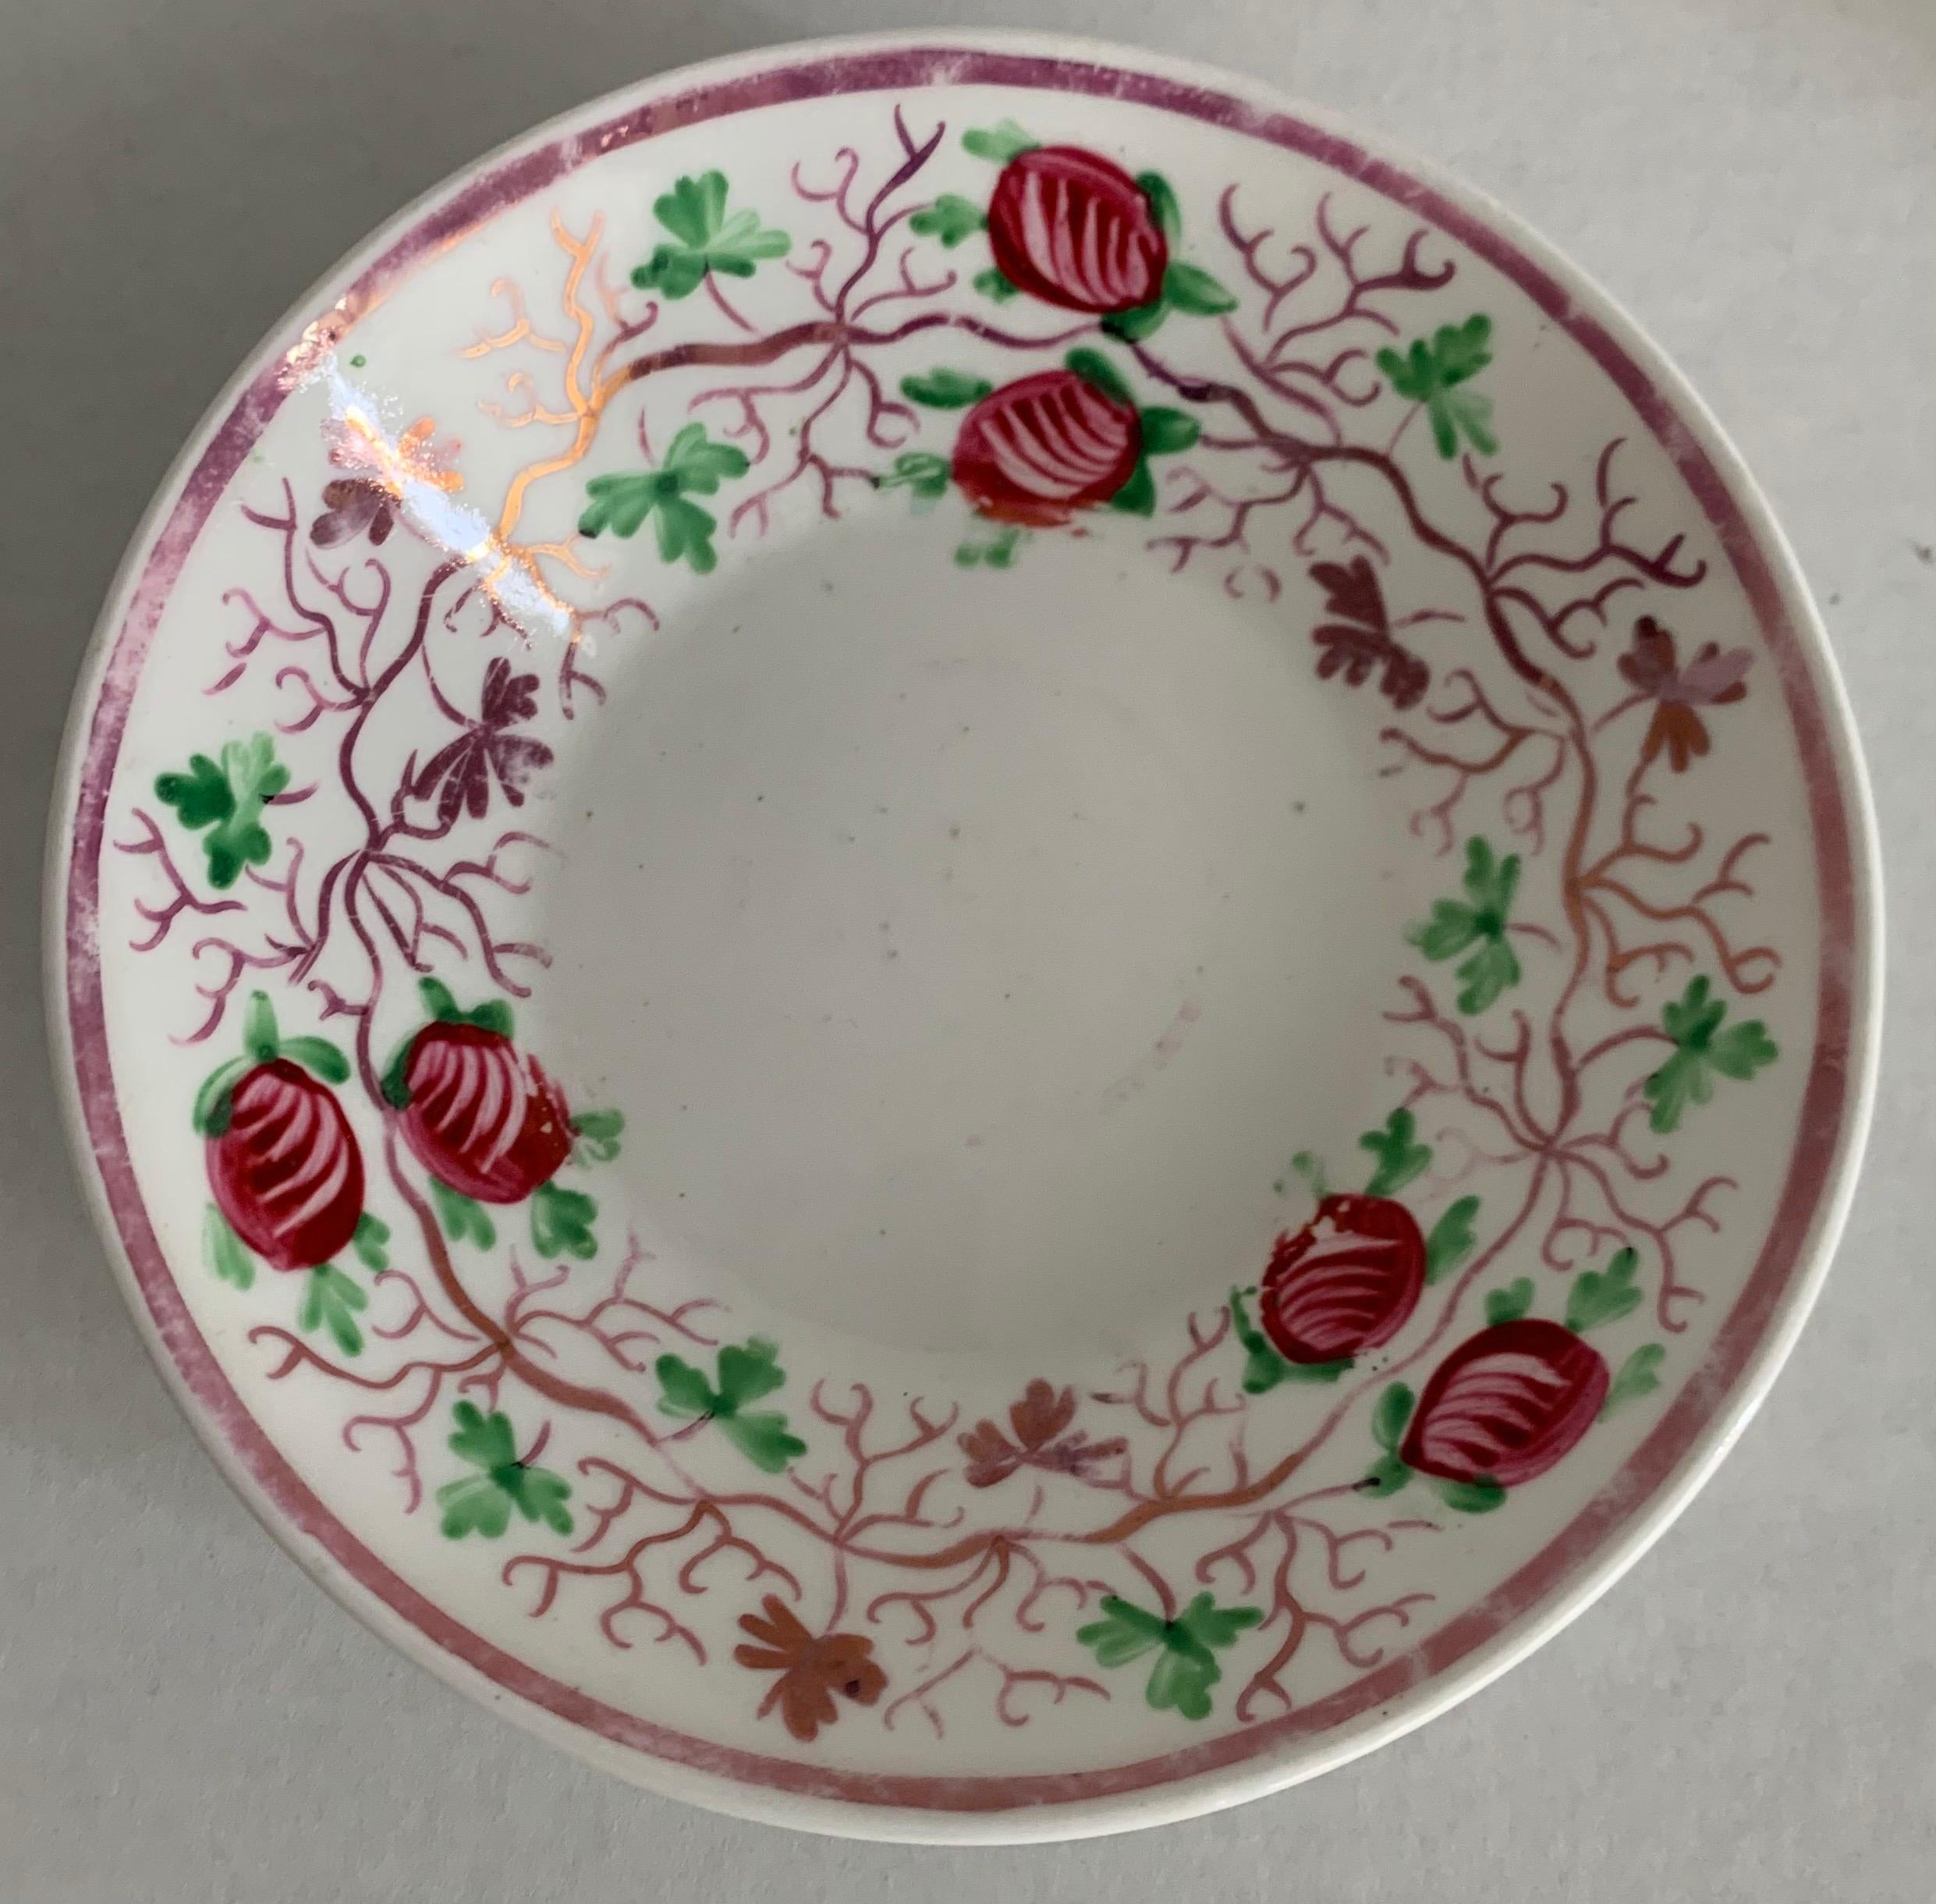 Late 19th century English soft paste porcelain lusterware saucer or trinket dish. Hand painted berry and vine motif. No makers mark or signature.